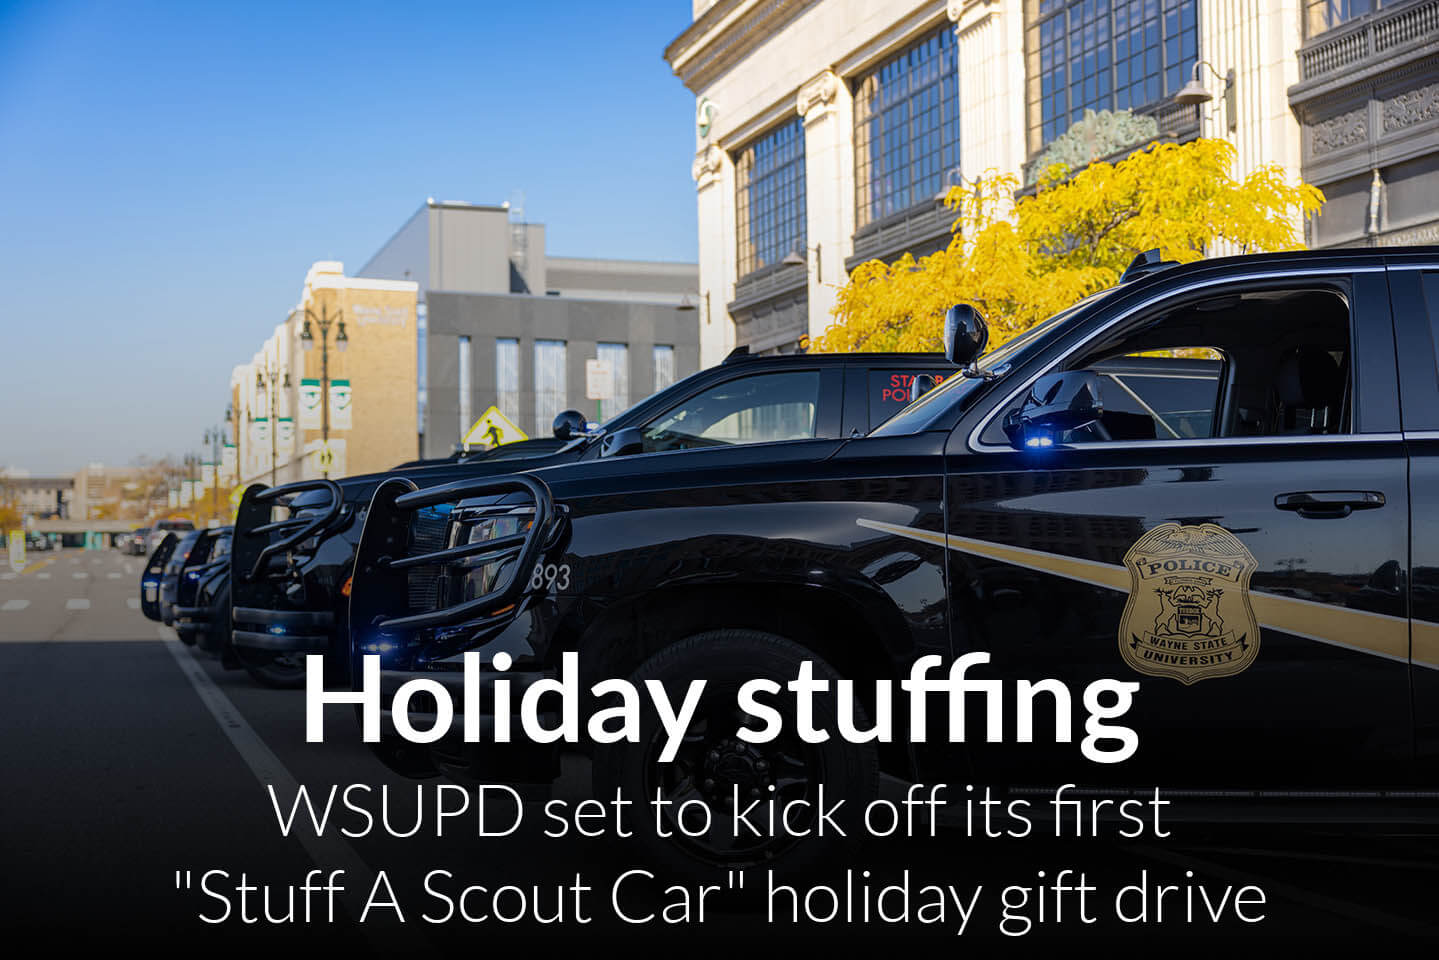 WSUPD to kick off Stuff A Scout Car holiday gift drive next week